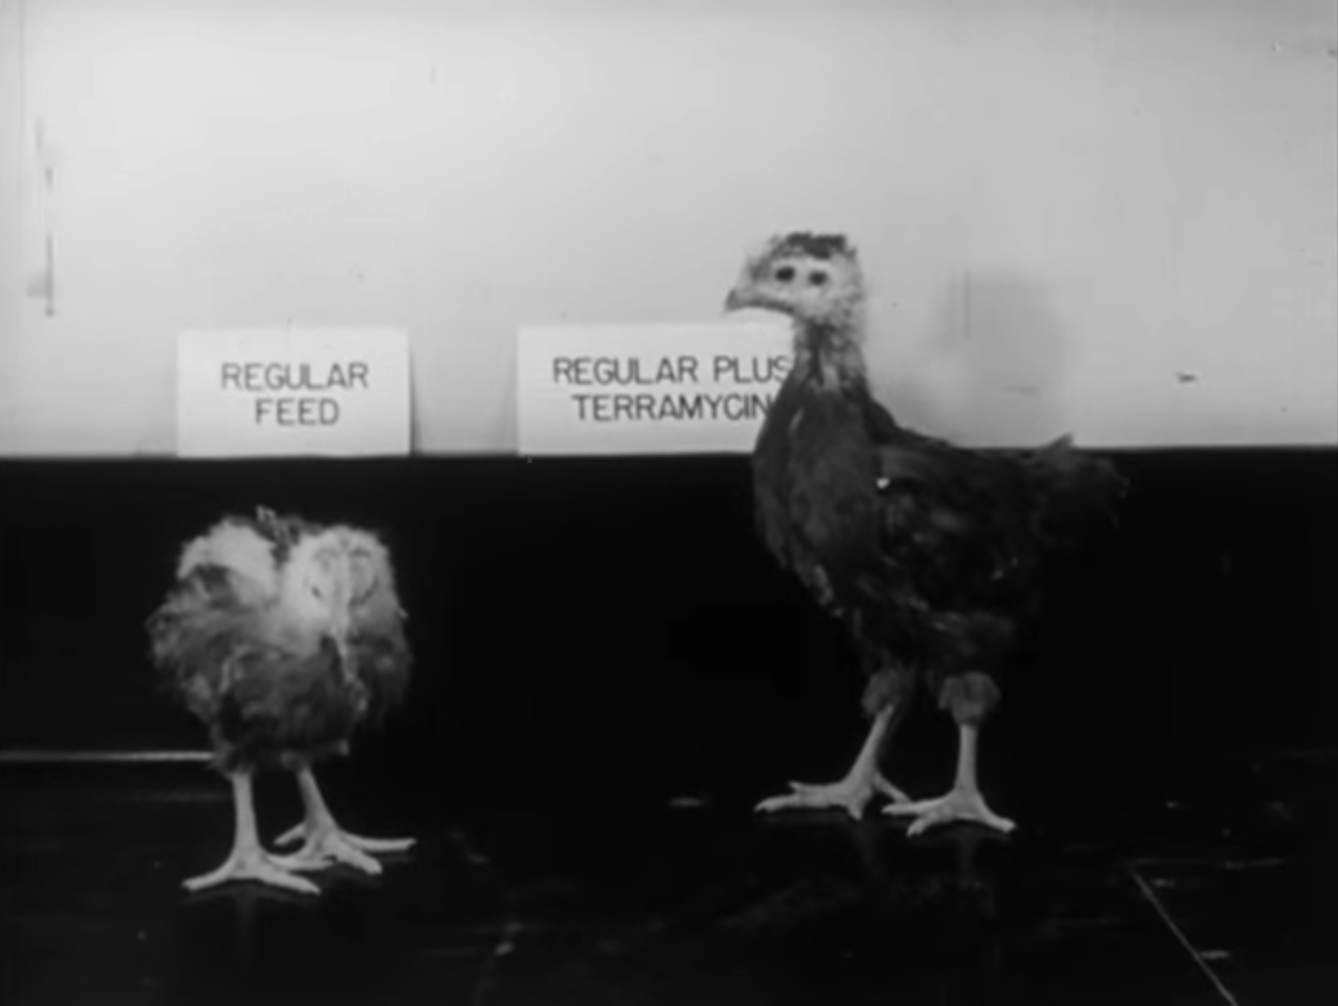 Still from black and white film featuring two chickens, one on regular feed, the other on regular plus terramycin